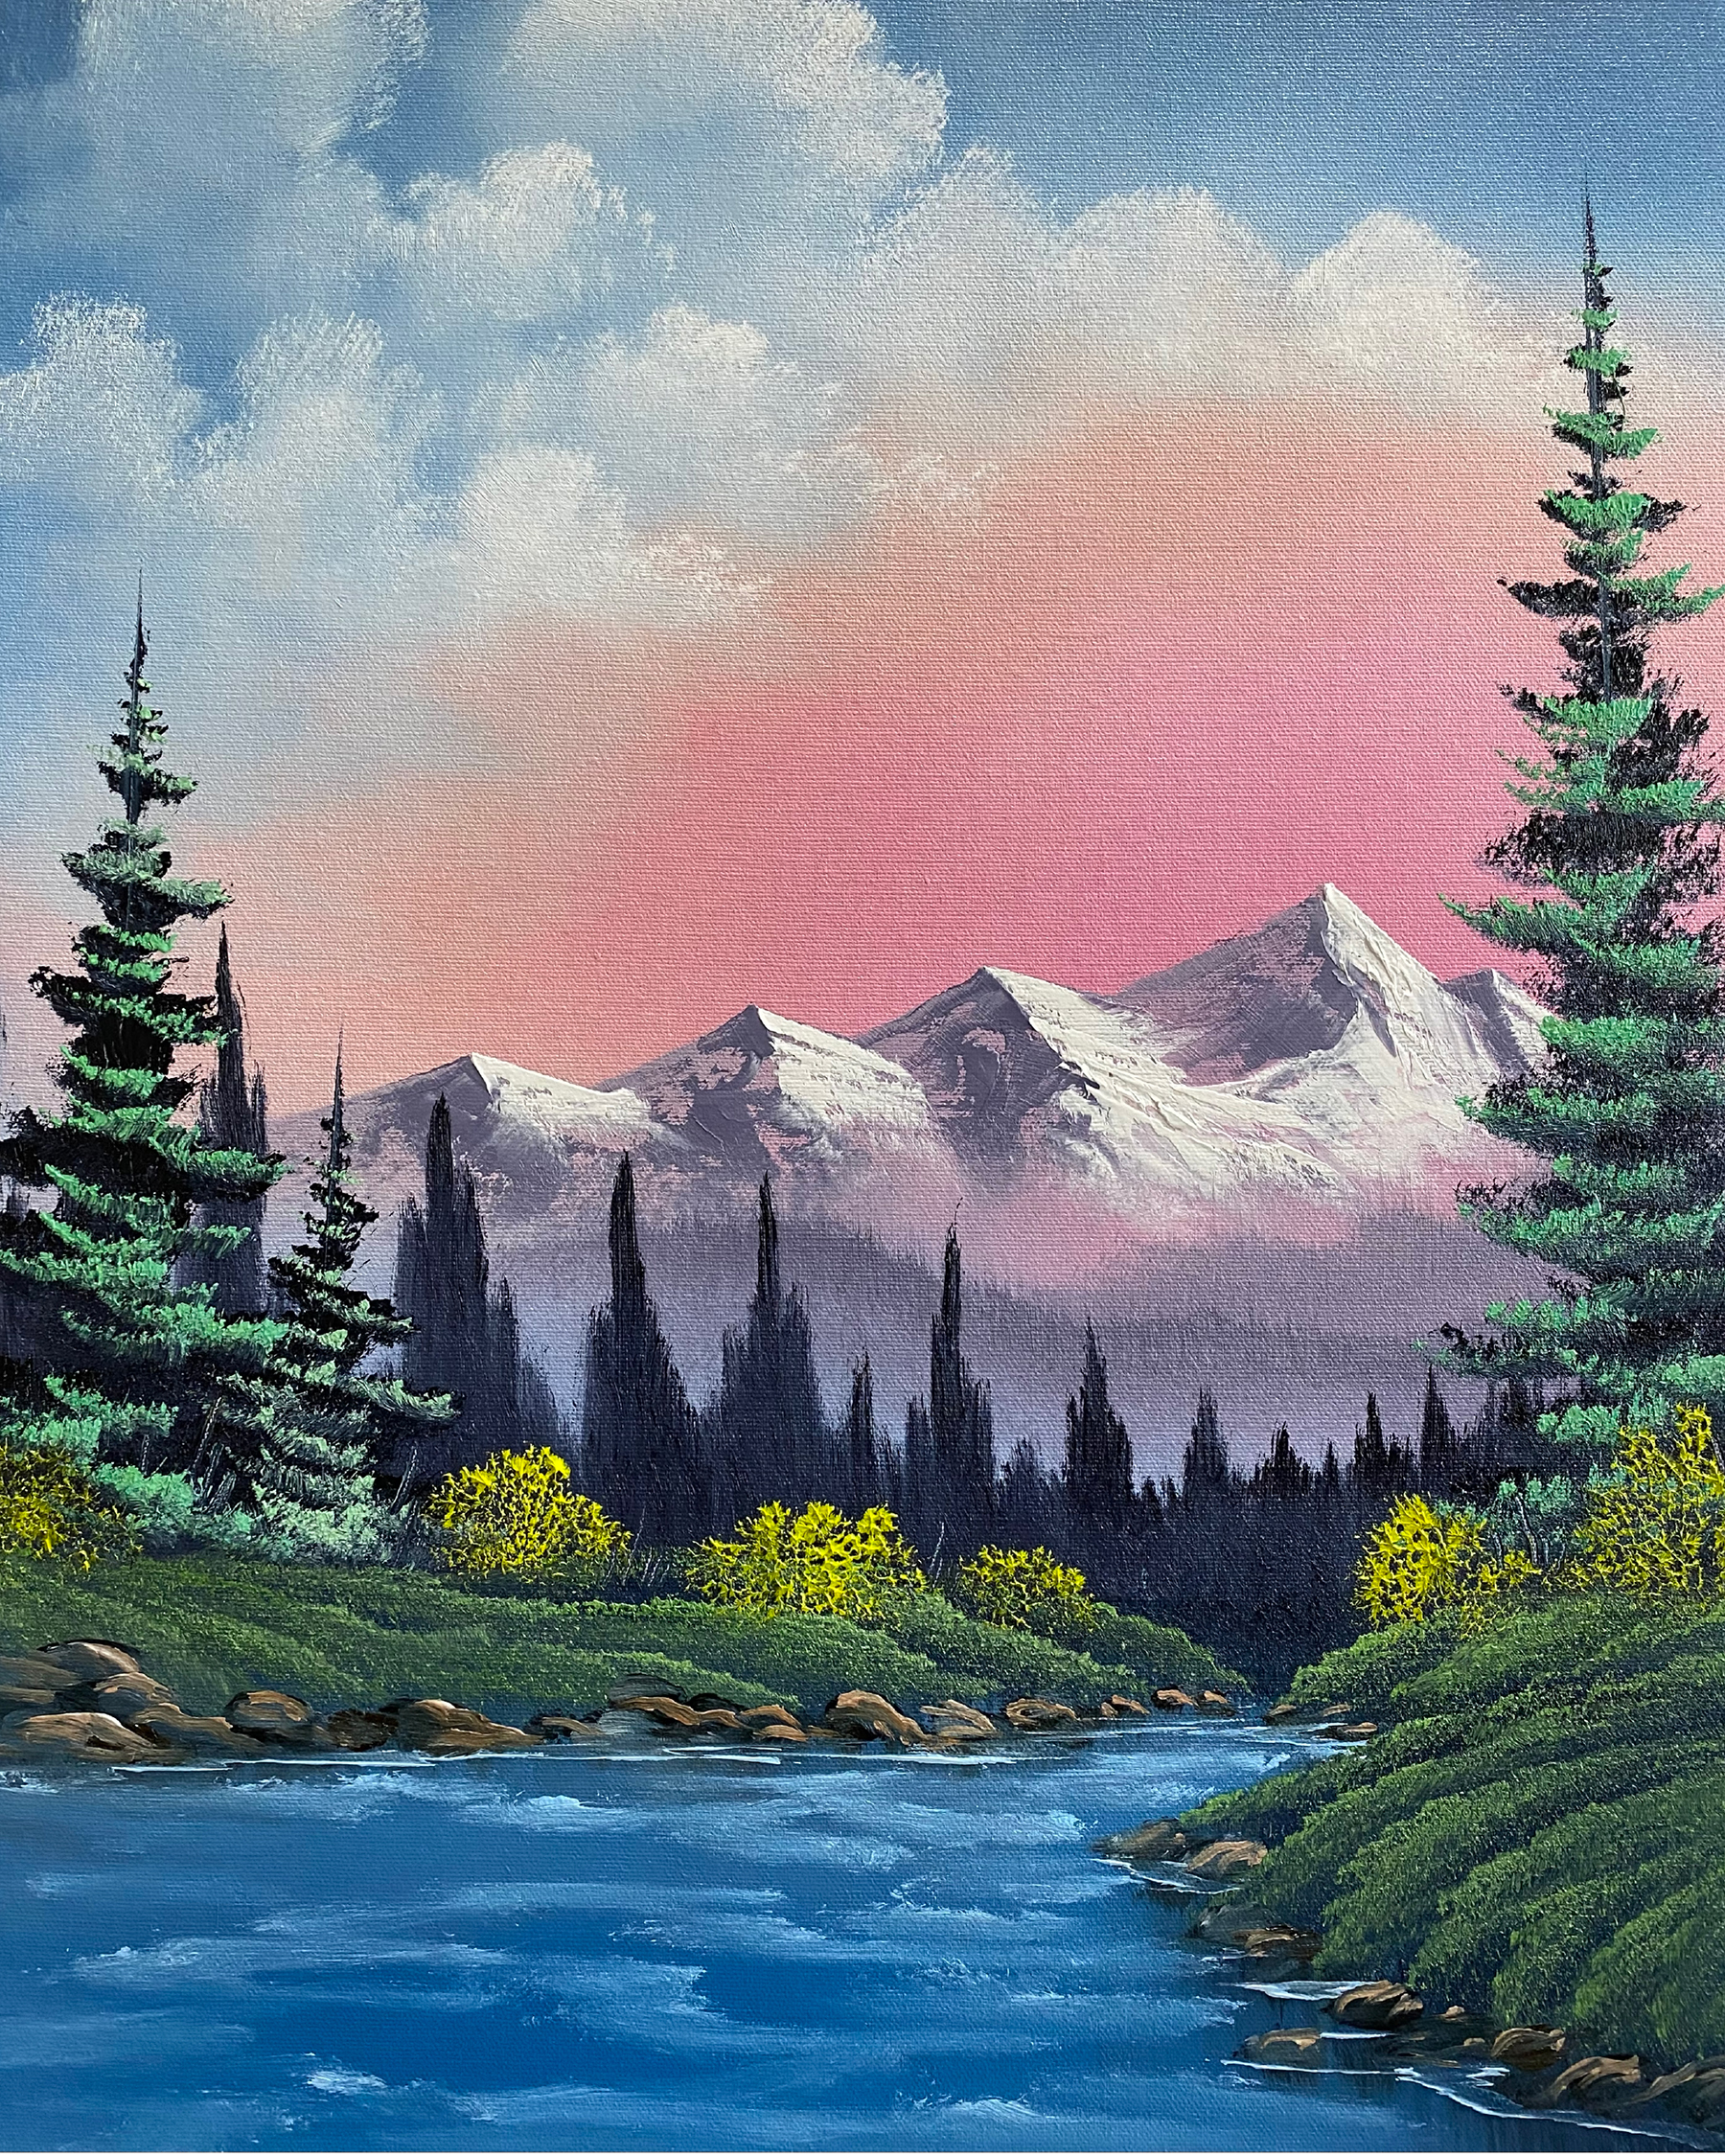 The Bob Ross Wet-on-Wet Technique® -- it’s real oil painting folks!